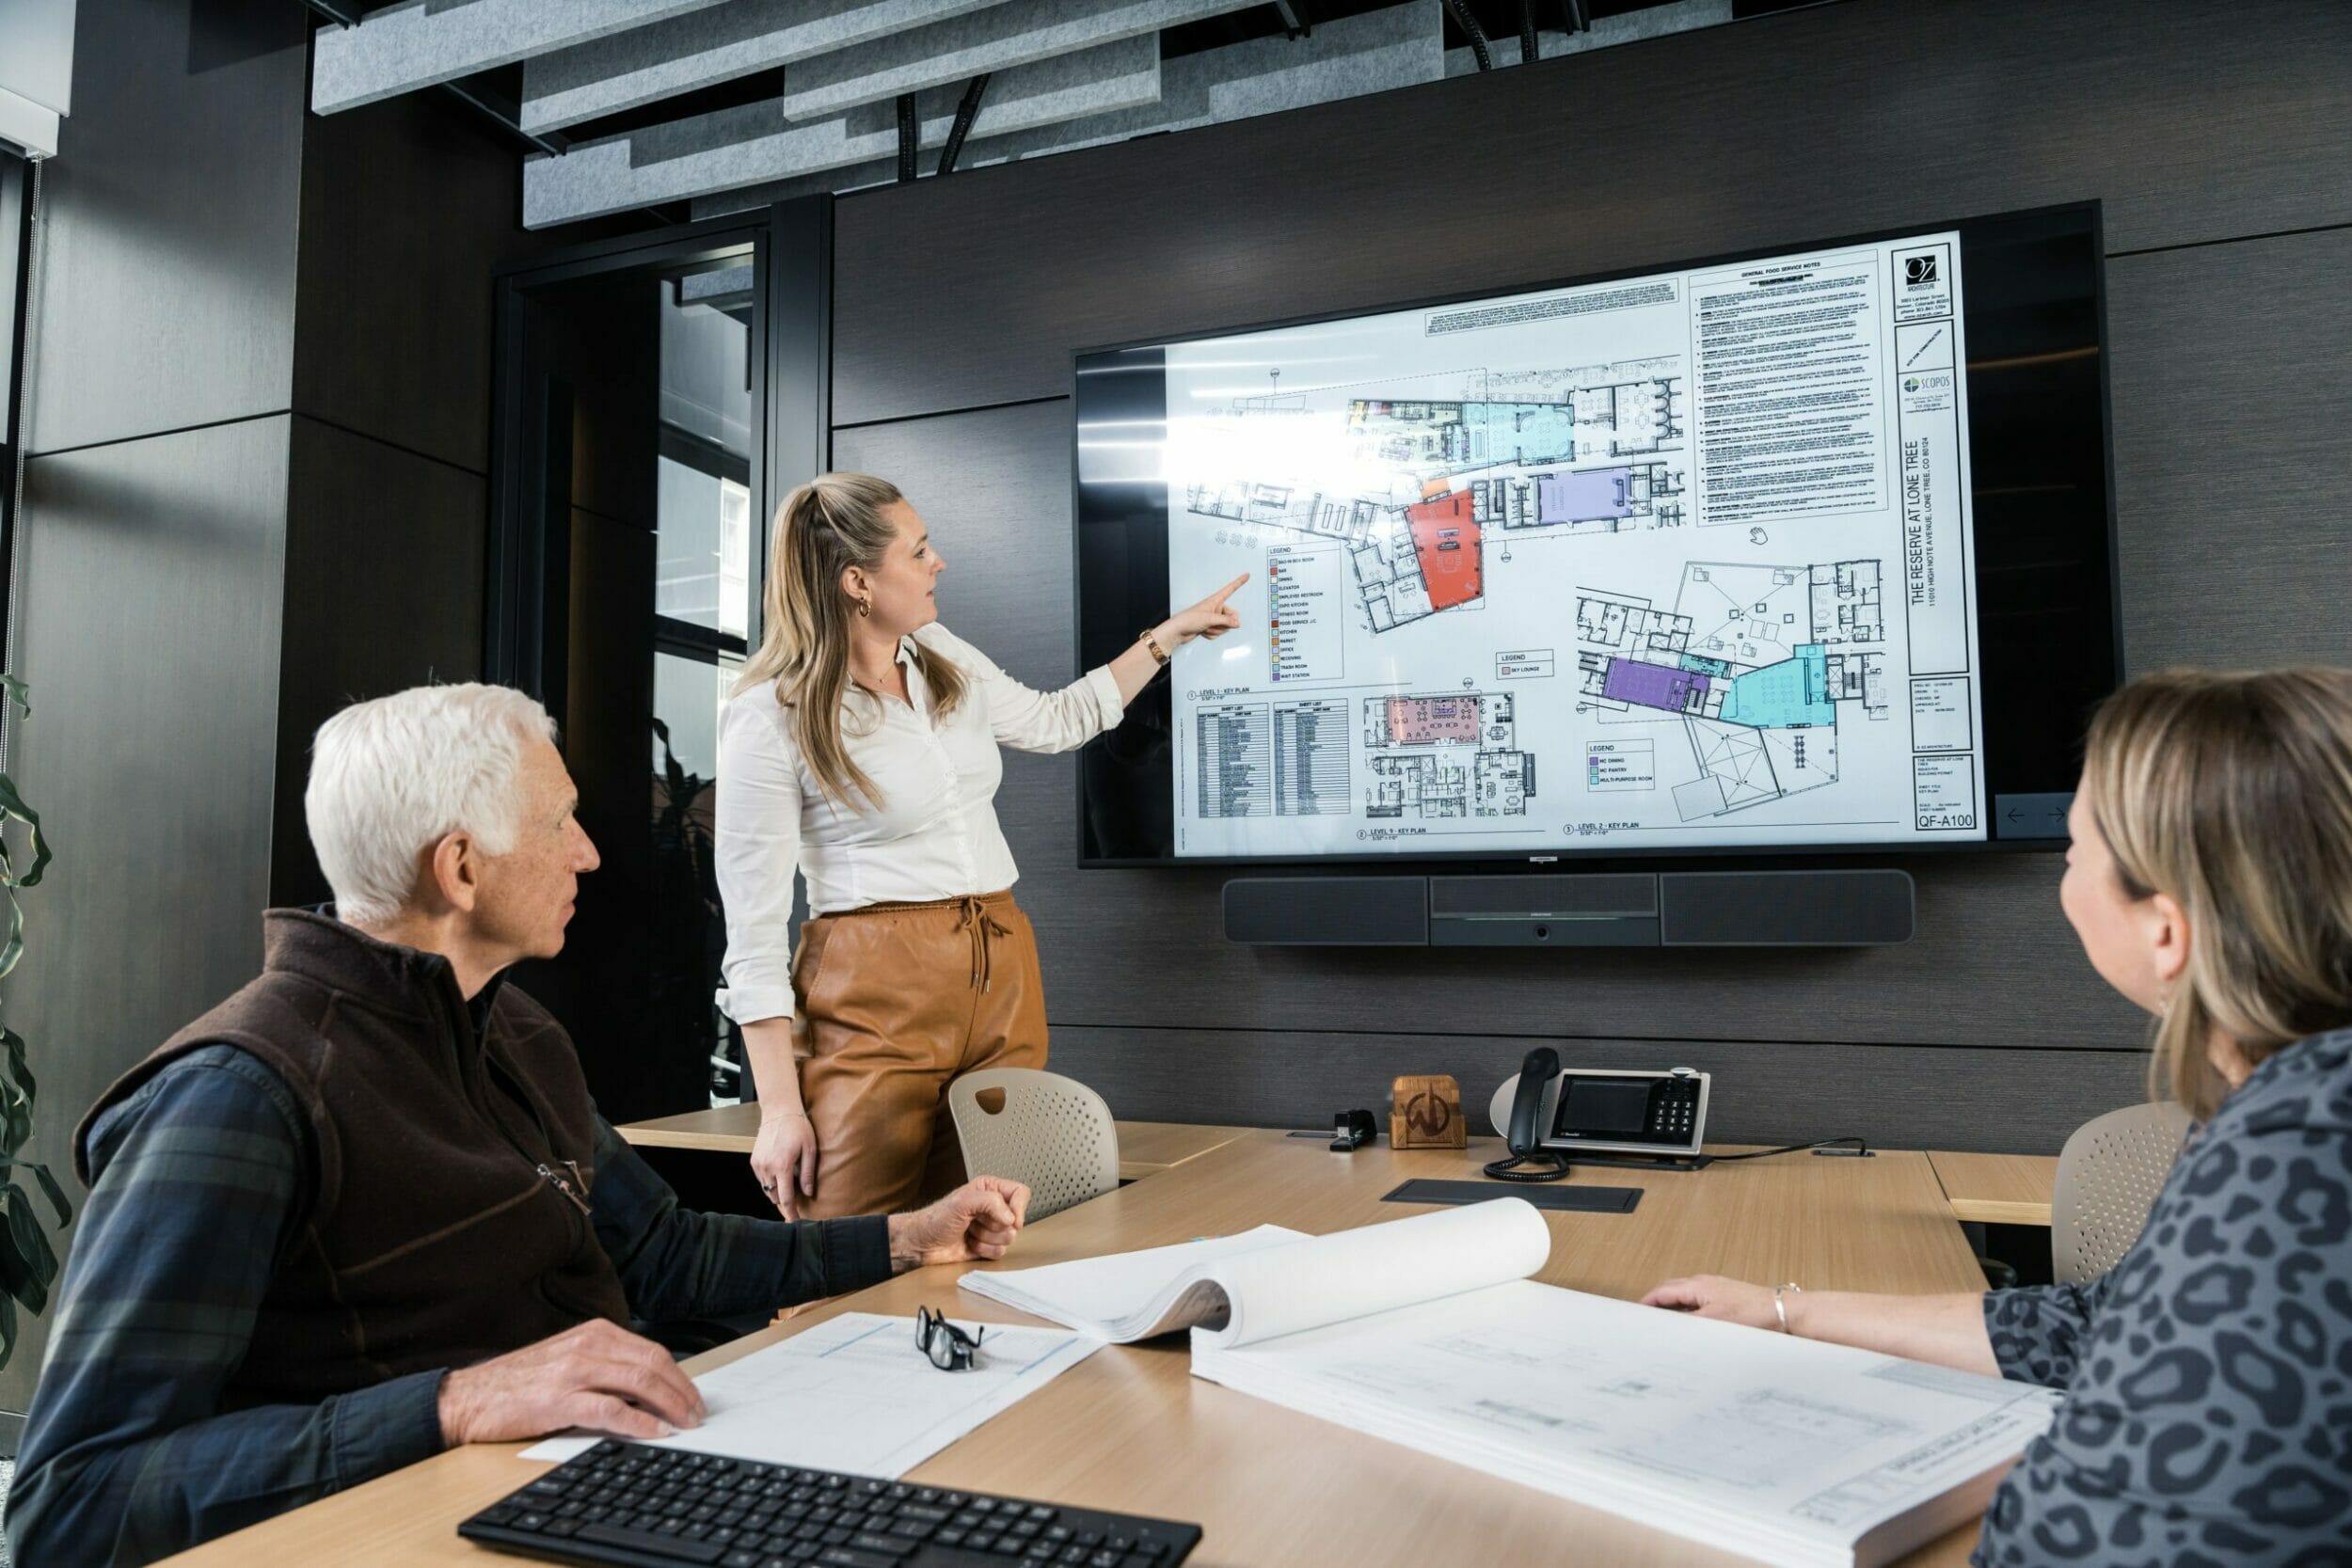 One woman standing next to a screen pointing at blueprints and two other individuals at the conference table looking at the screen